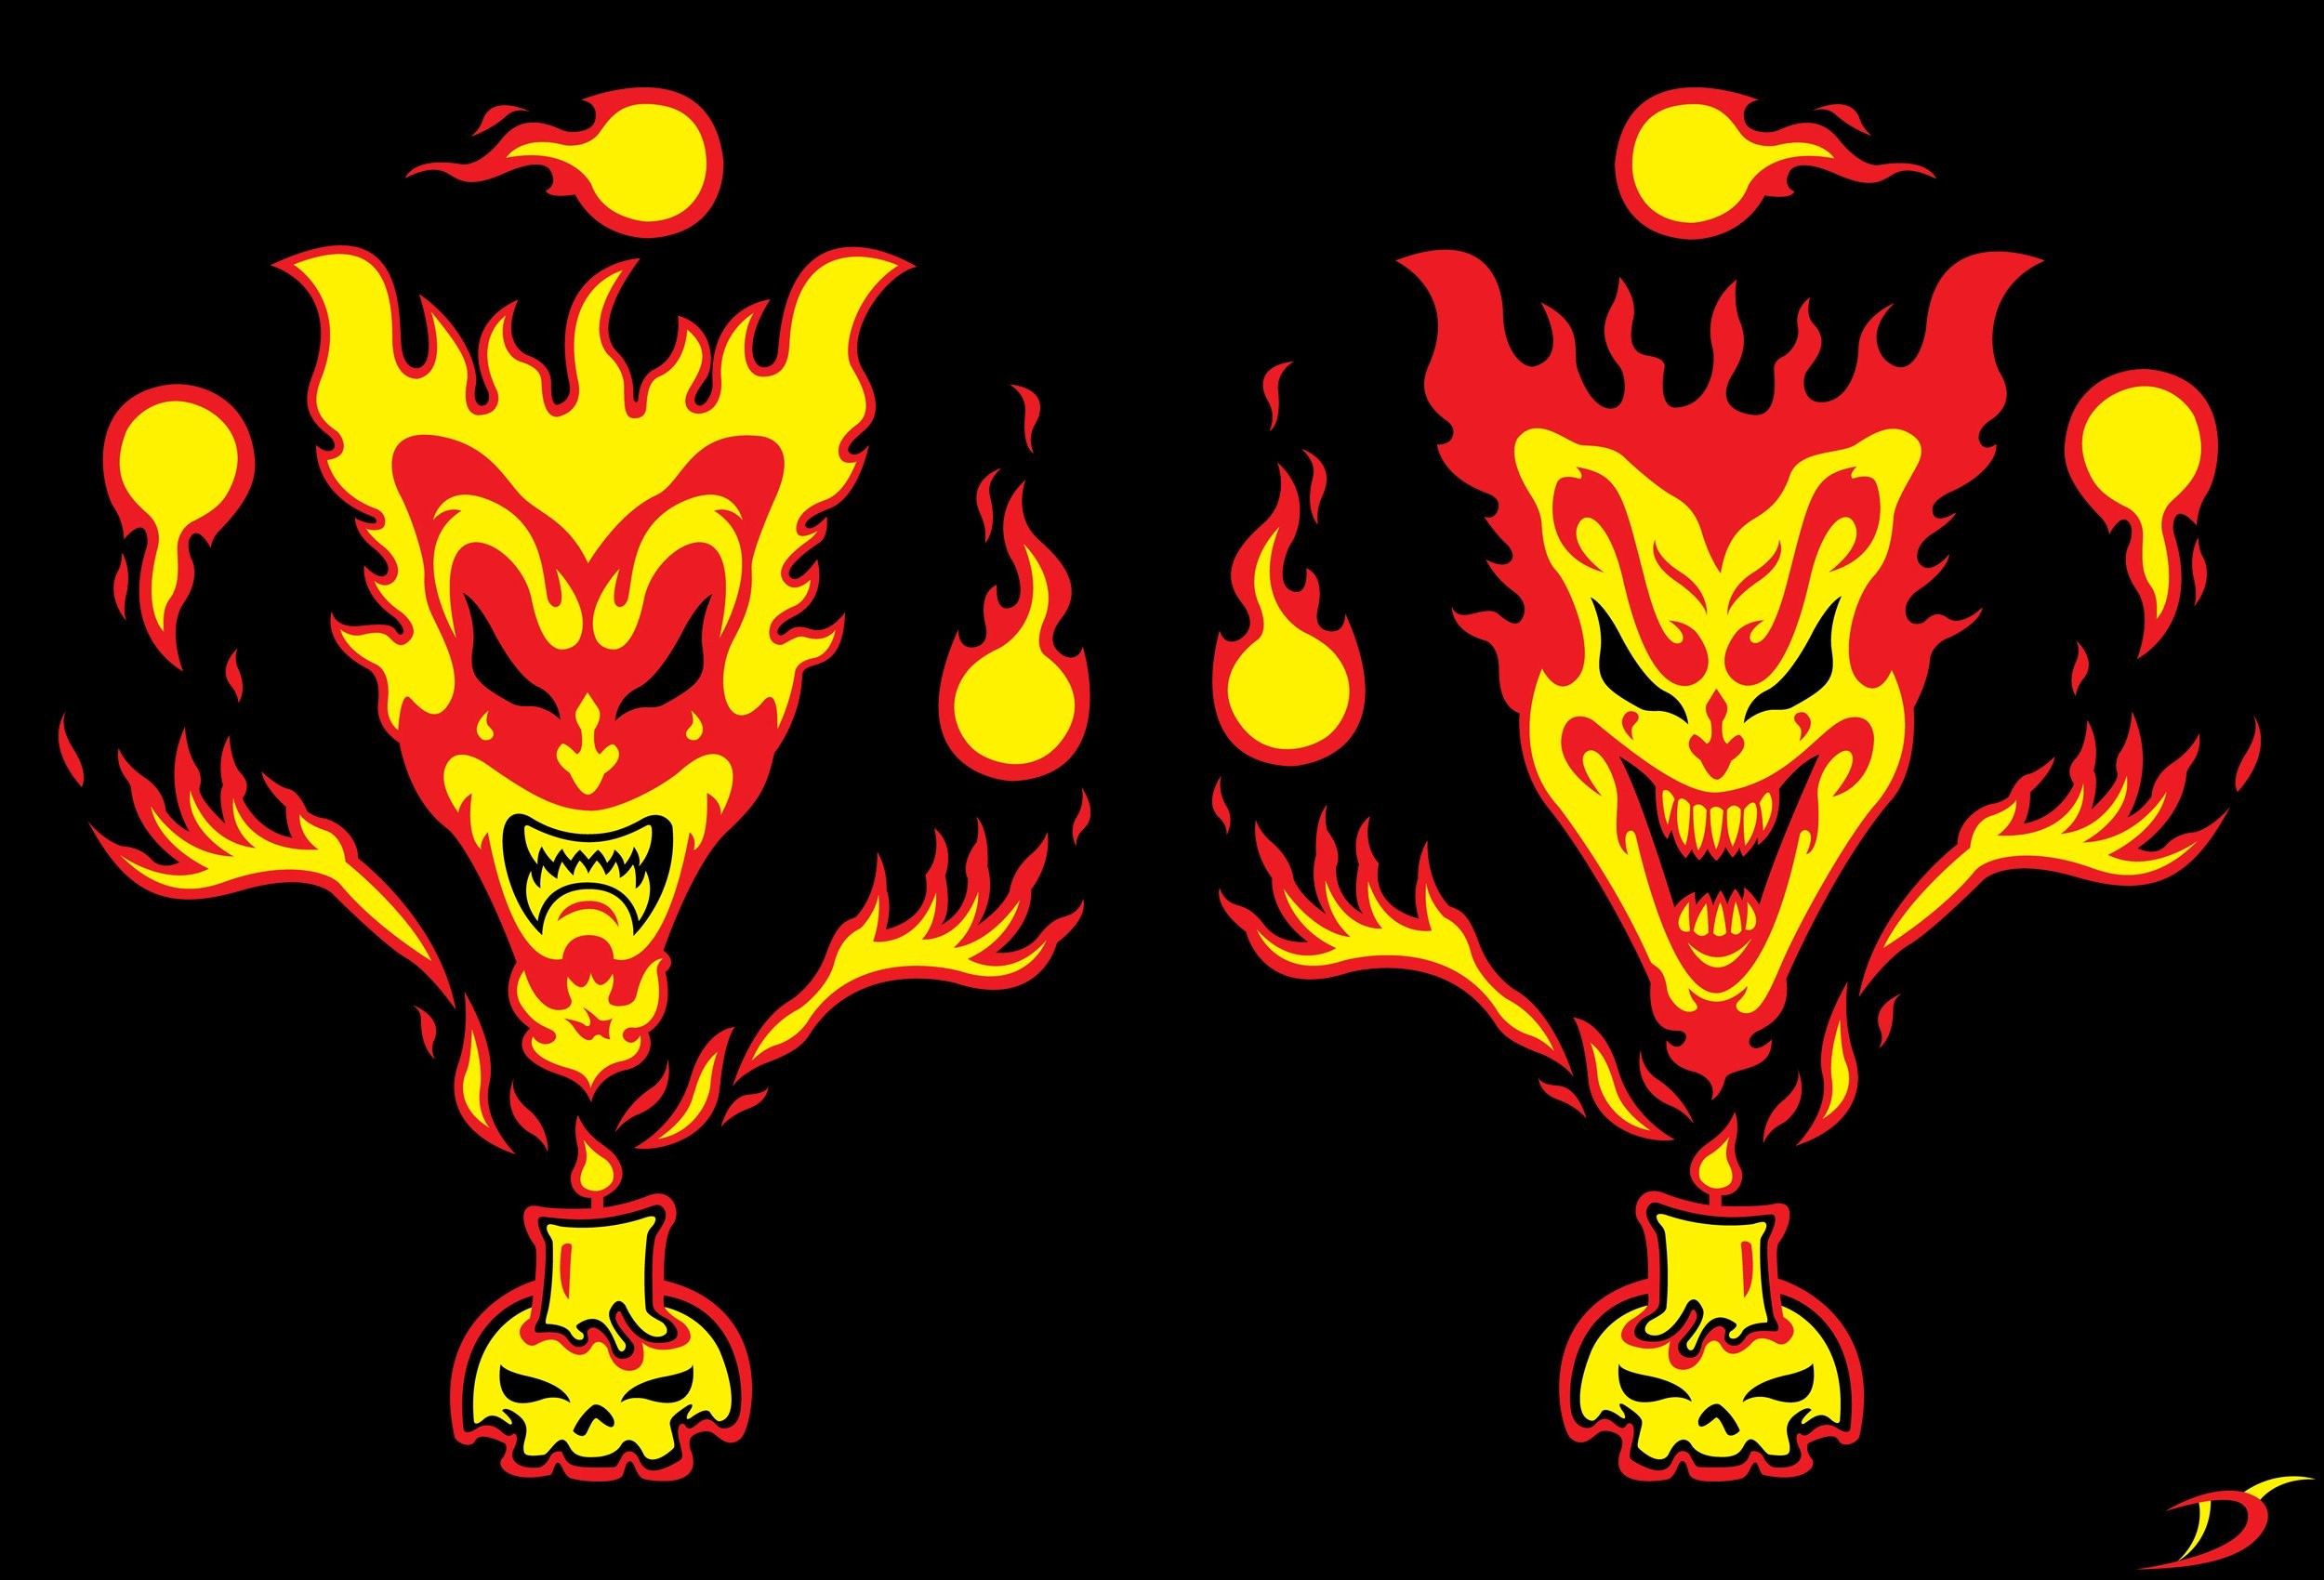 Icp Wallpapers